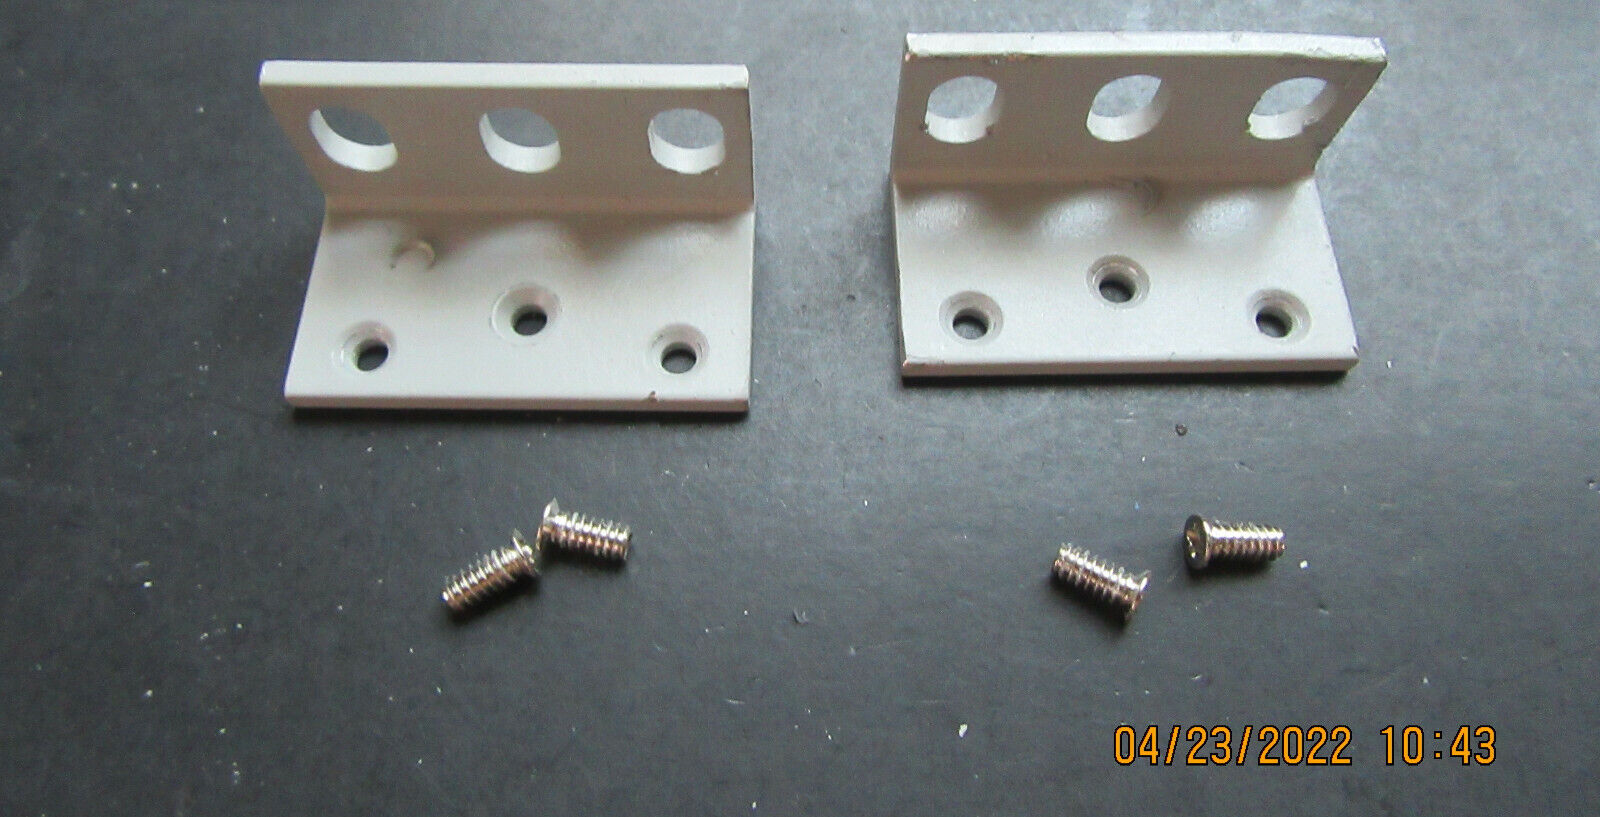 Genuine Ears with 4 Screws for CheckPoint T-180 Security Appliance